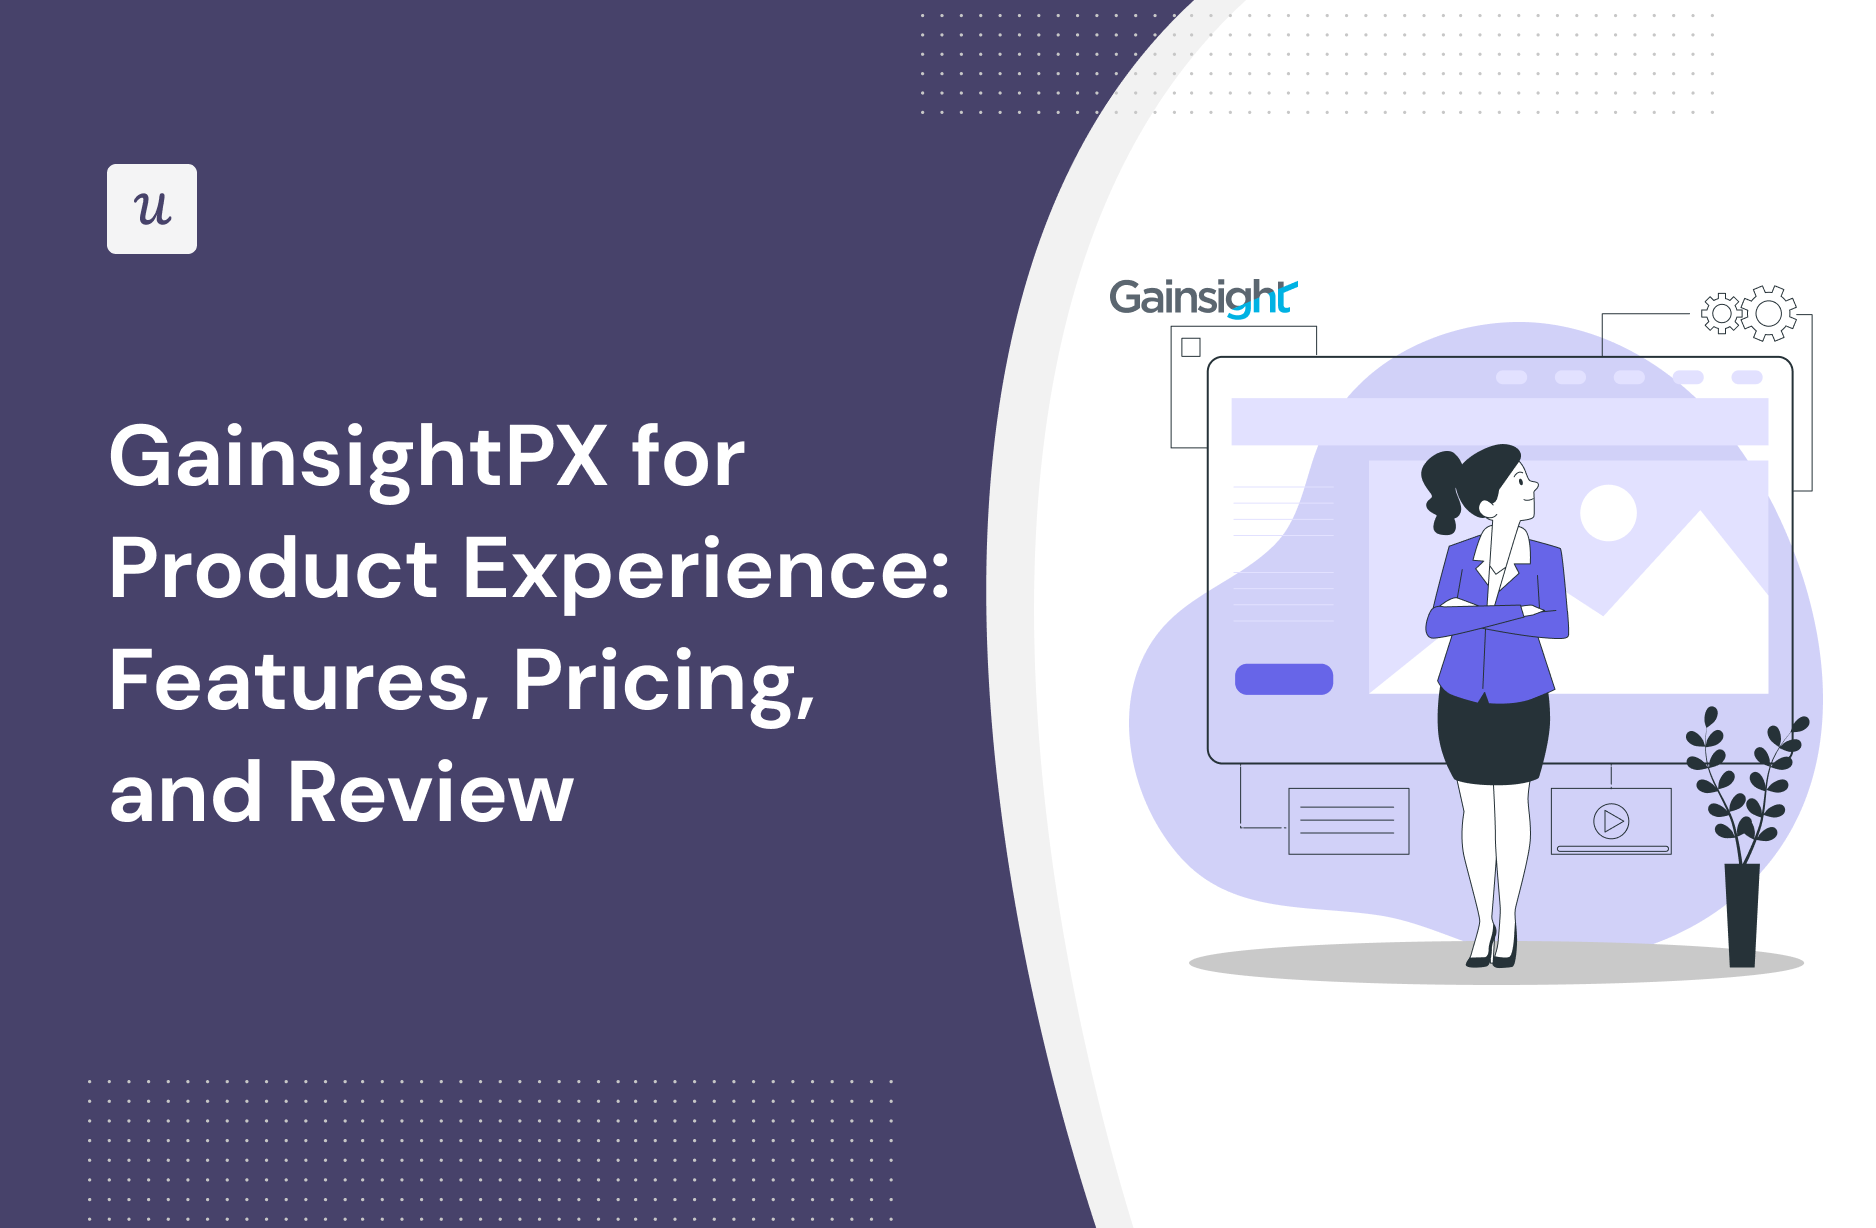 GainsightPX for Product Experience: Features, Pricing, and Review